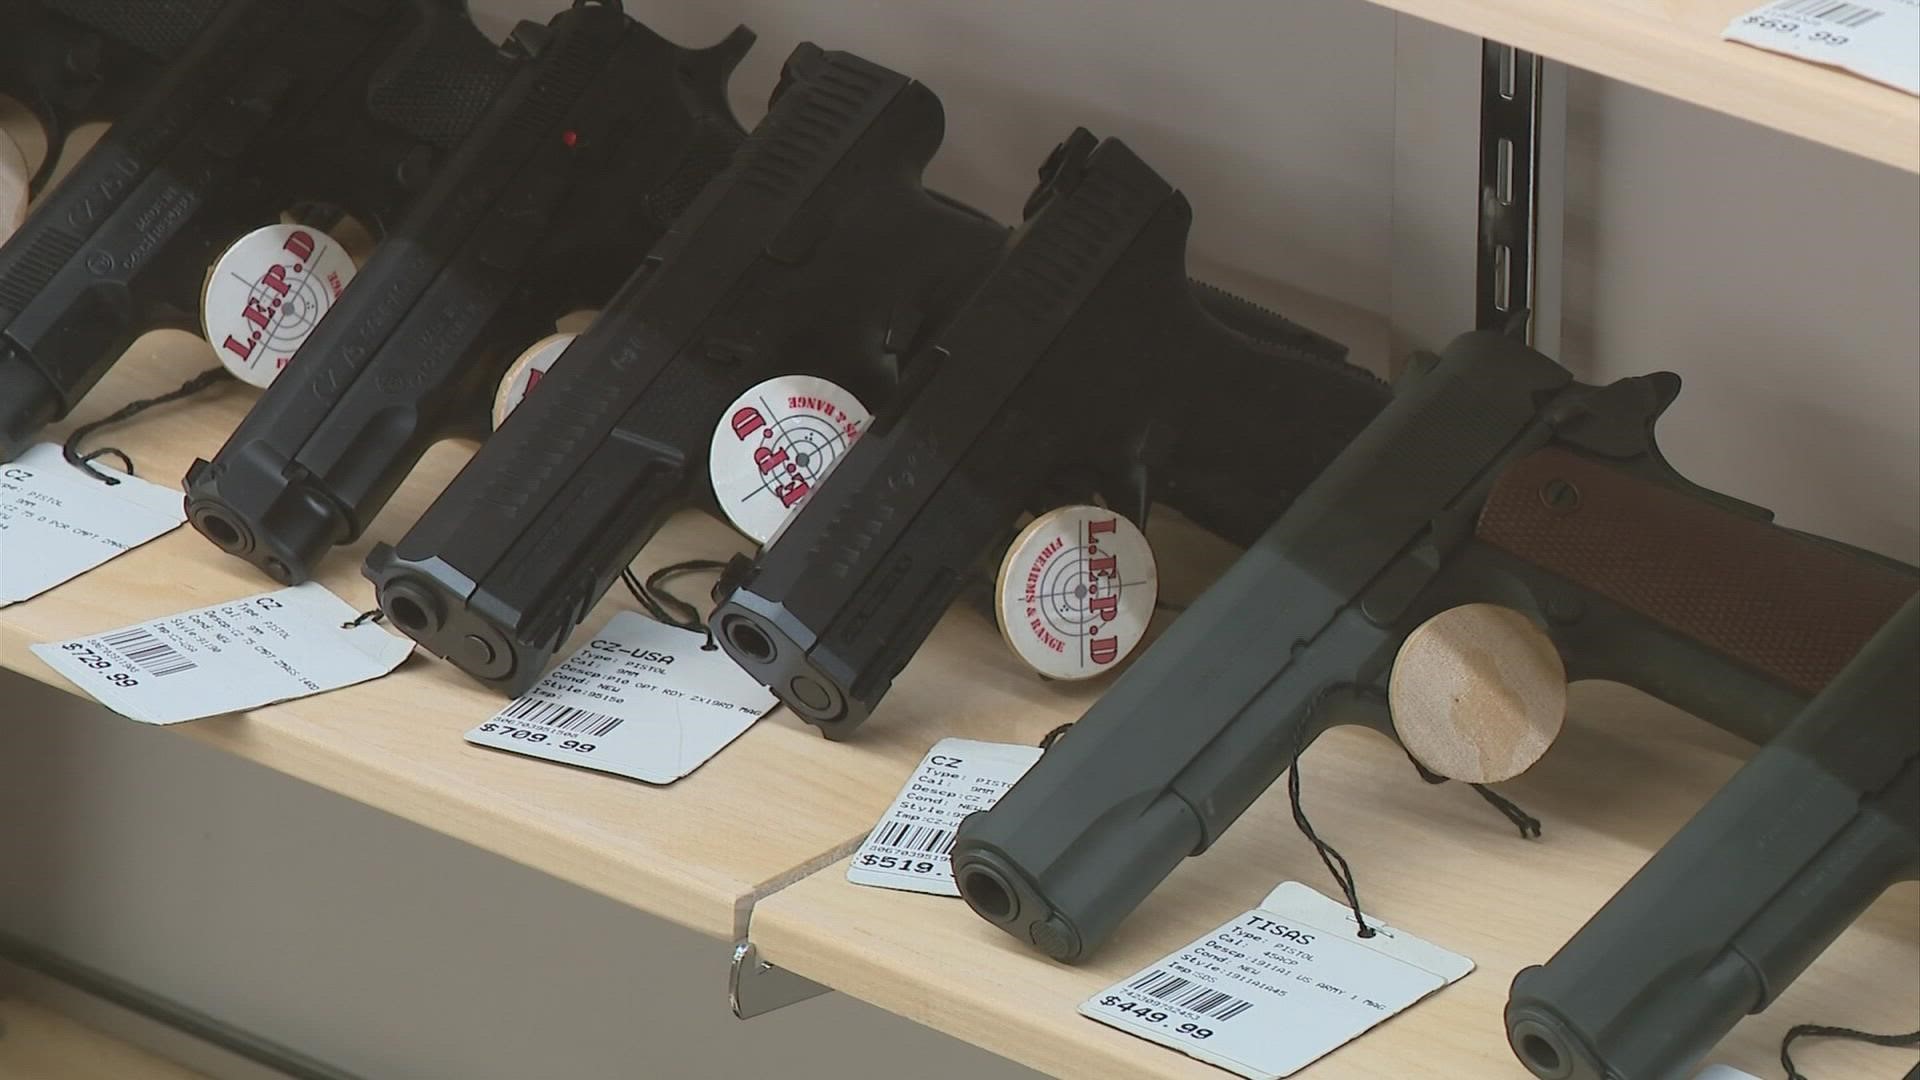 The Hamilton County Sheriff said it's a "fantasy" to think the permitless carry bill is going to make people safer.